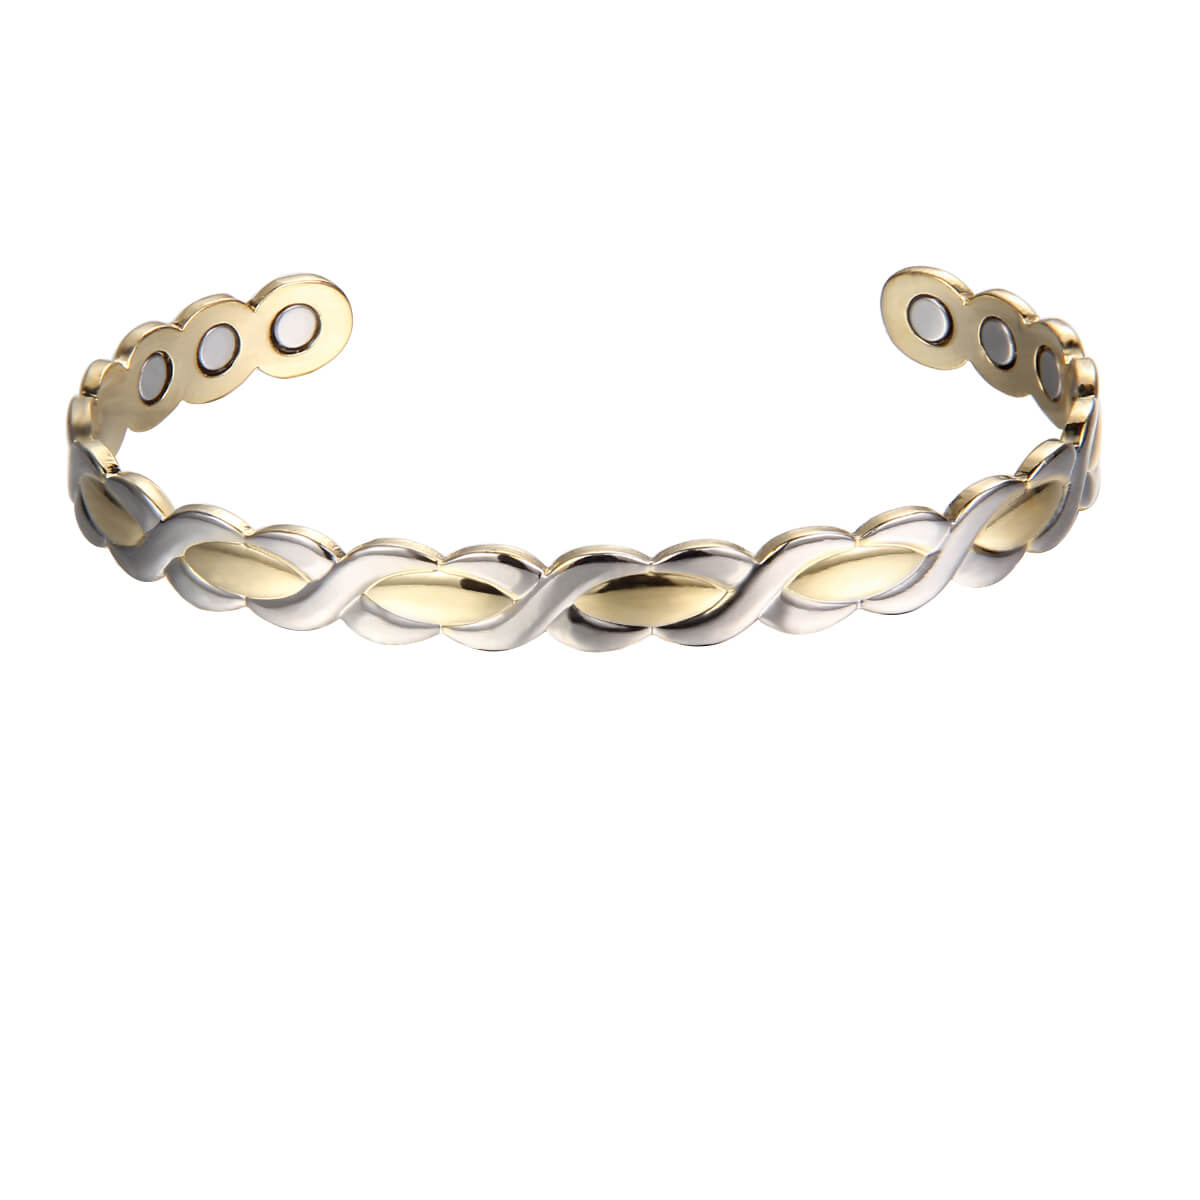 60. The Jace - Silver and Gold twist Copper Band